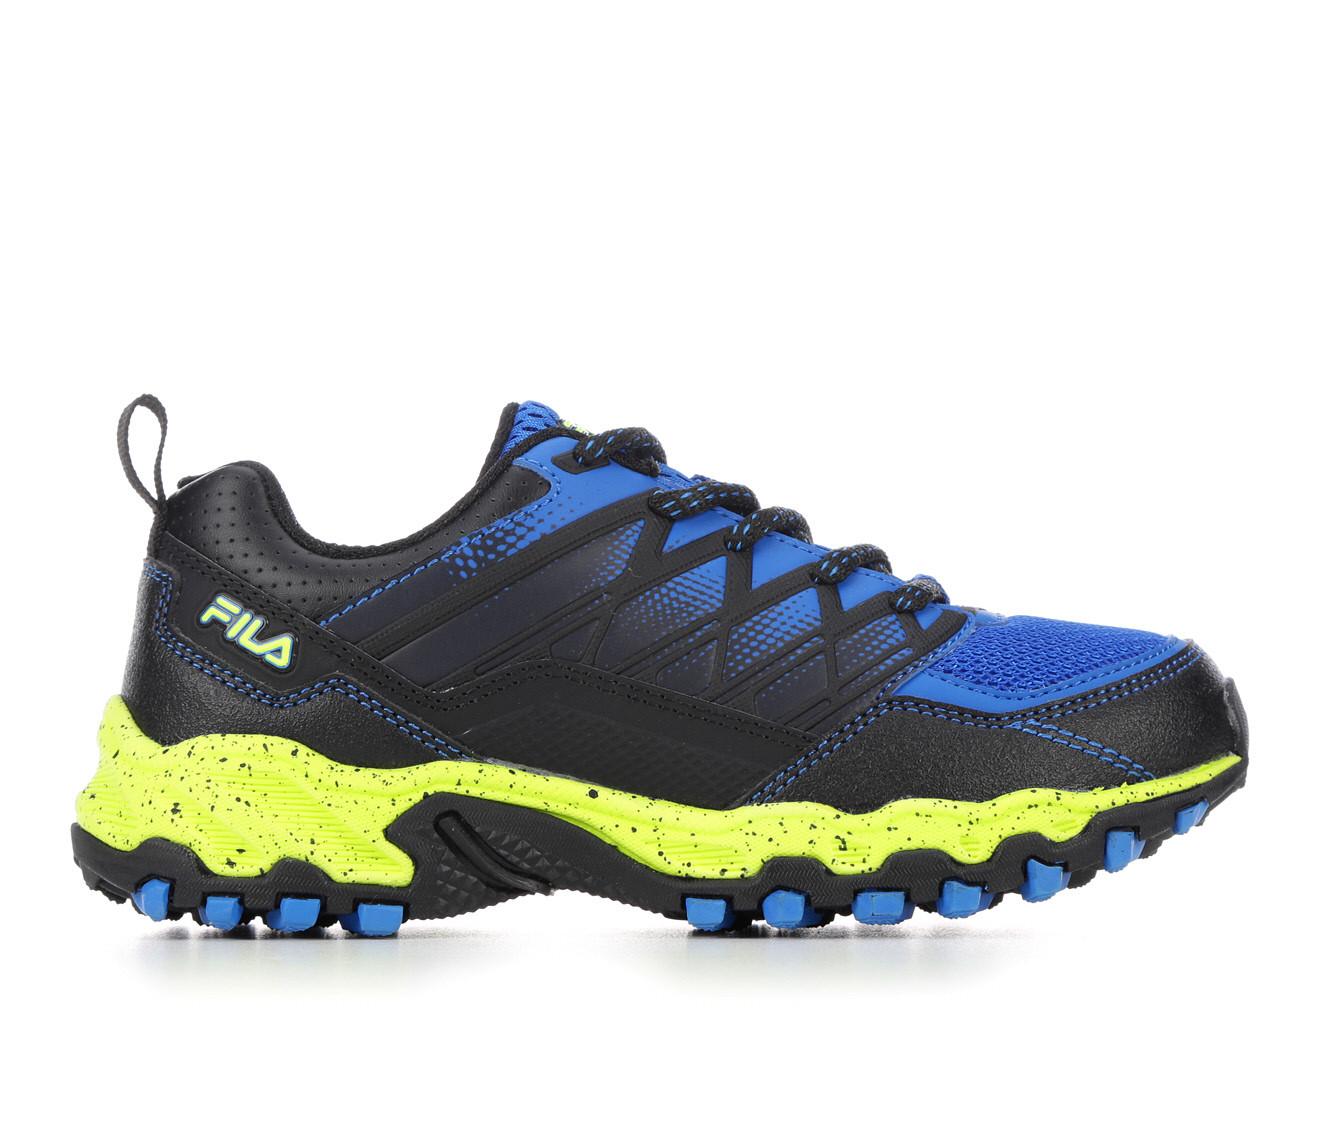 FILA Shoes, Sneakers, Kids\' Gym Shoes & Accessories | Shoe Carnival